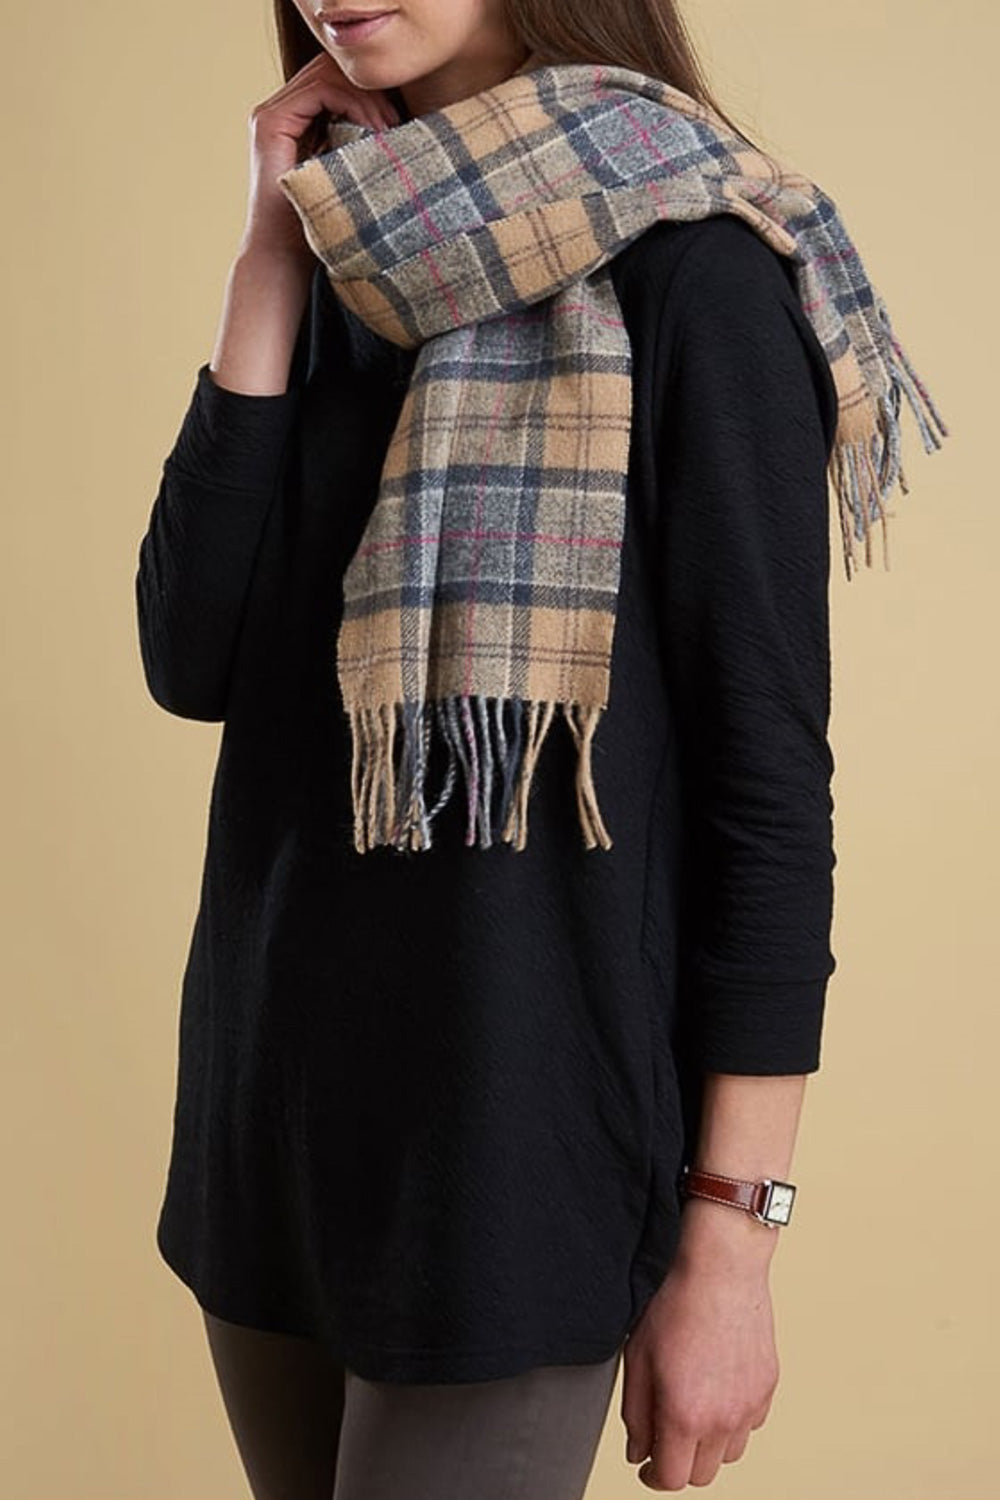 barbour scarf womens sale